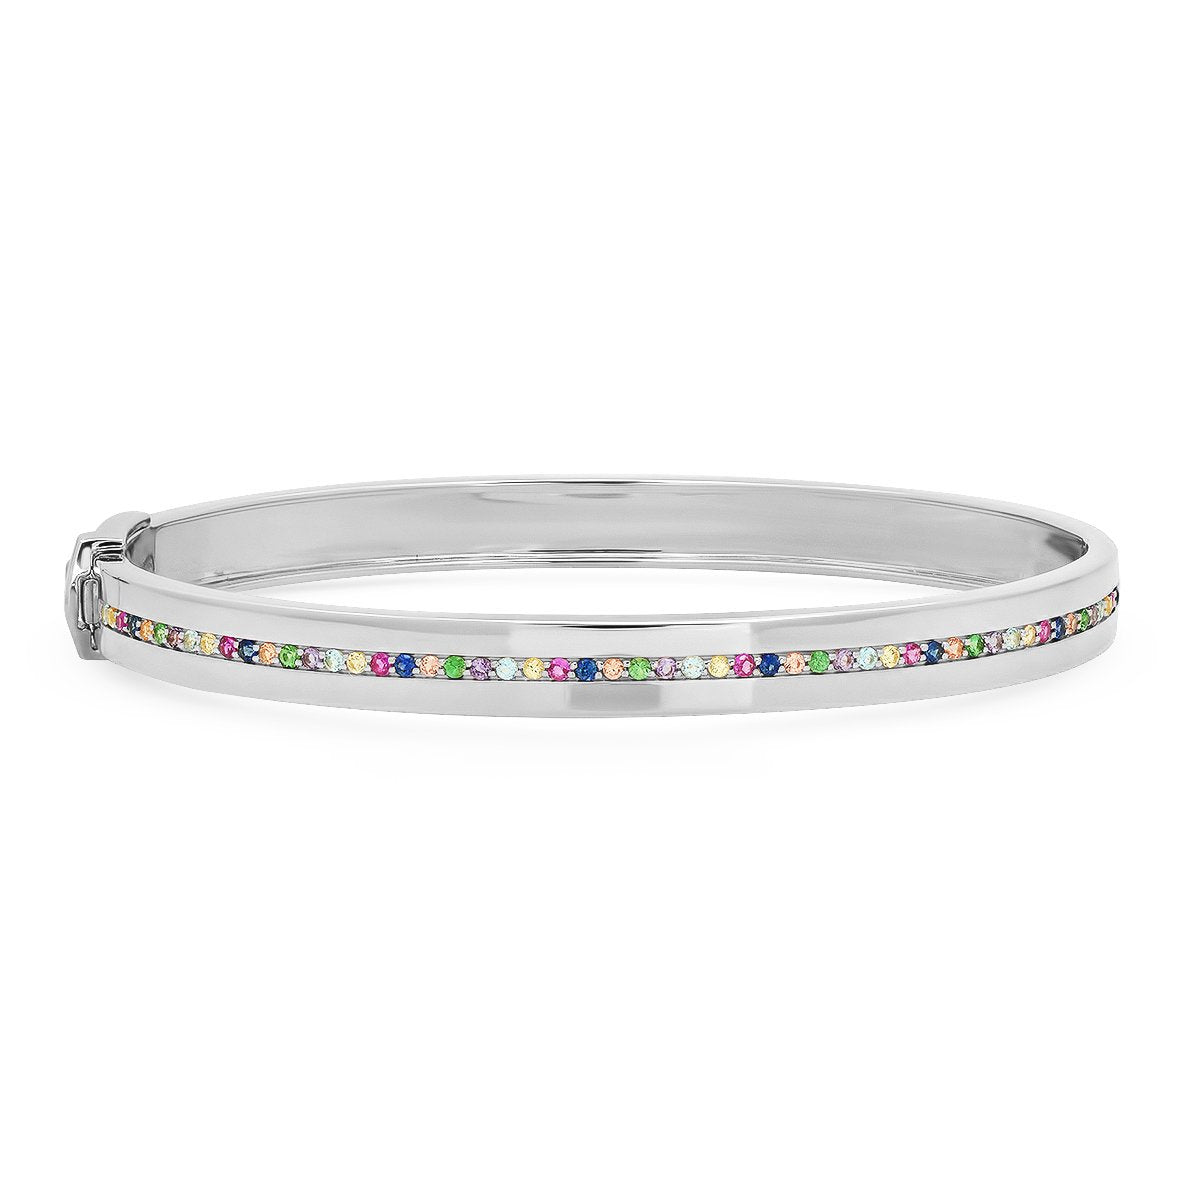 14K White Gold Bangle with Multi Colored Row